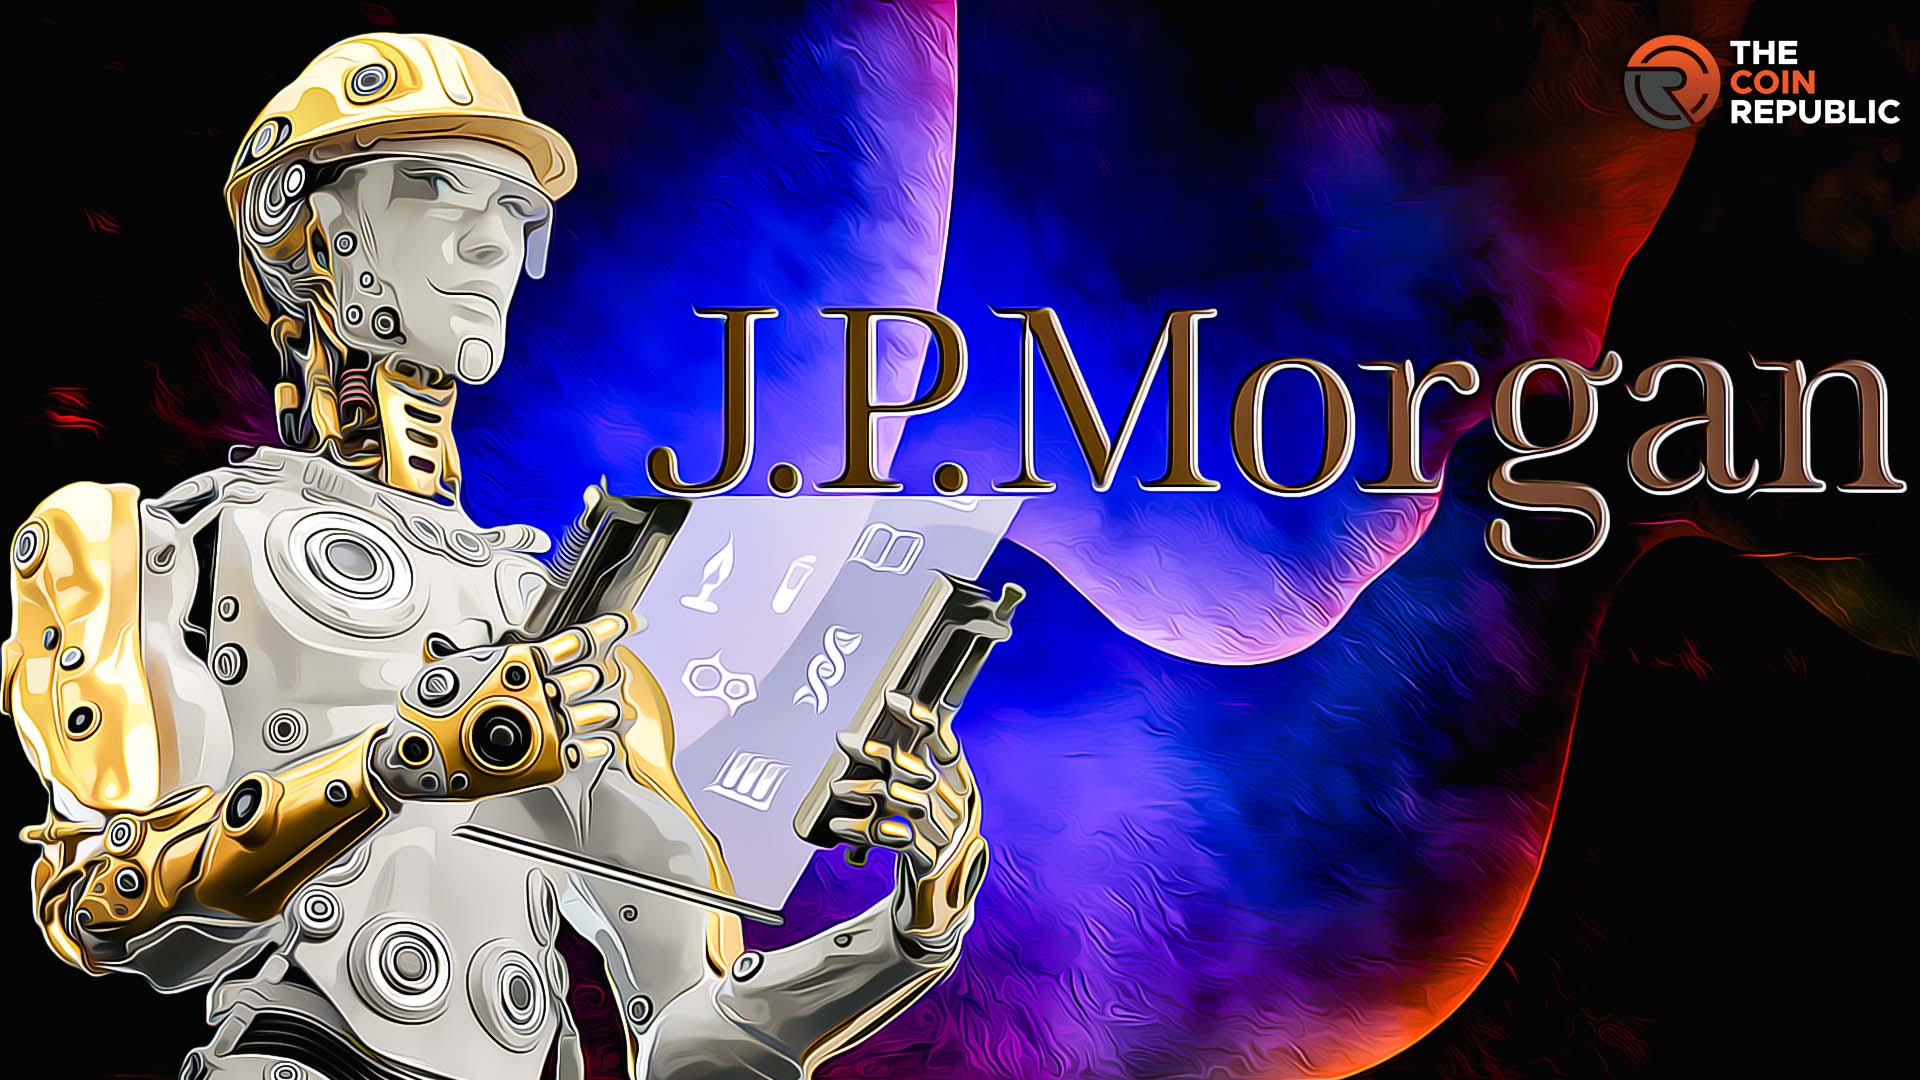 JPMorgan Chase Would Use A.I. Tool as an Investment Advisor